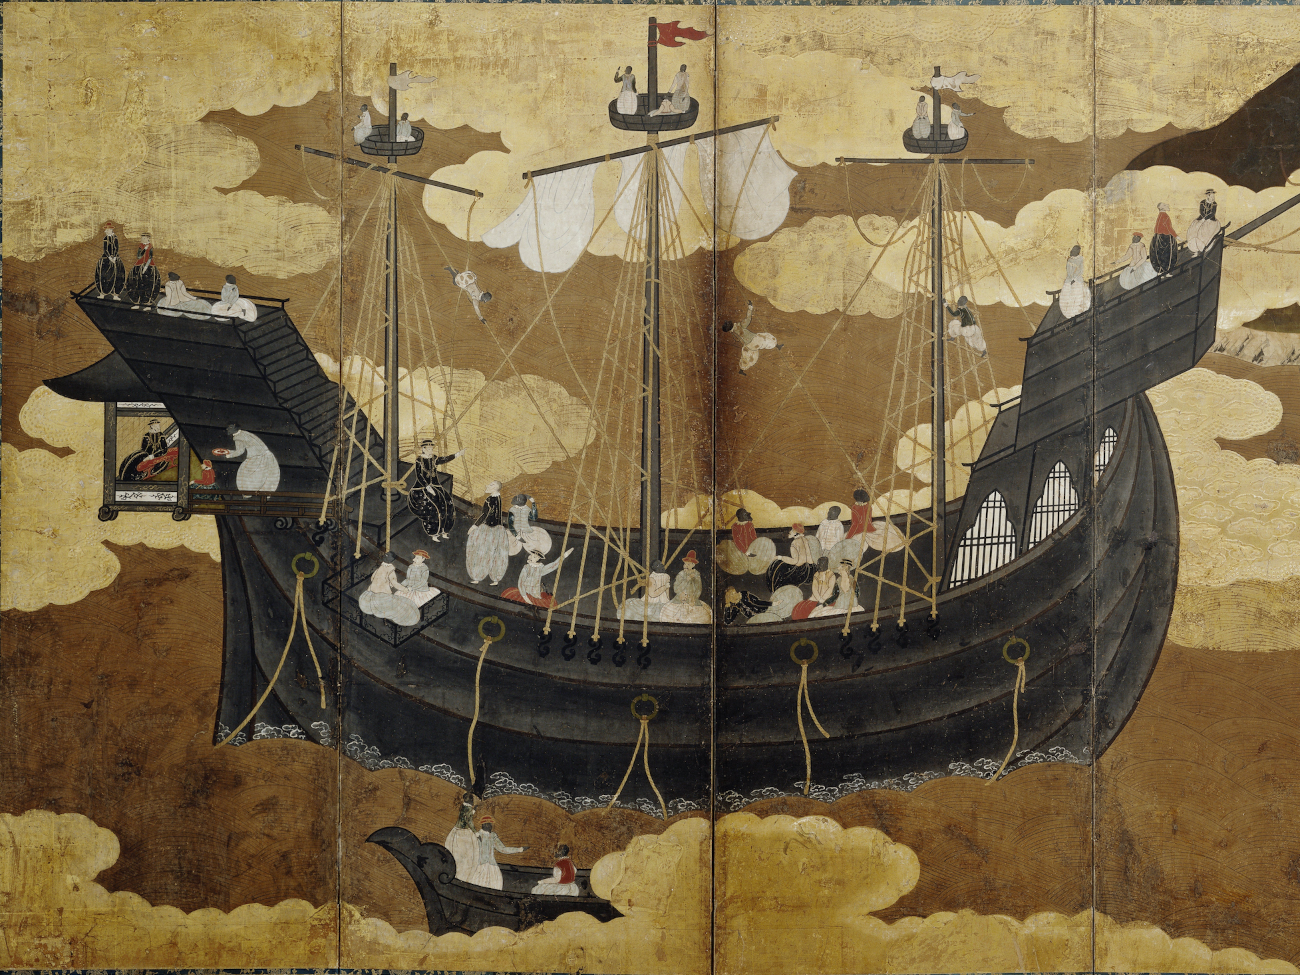 Folding Screen with the Arrival of a Portuguese Ship, anonymous, c. 1600 - c. 1625 - Search - Rijksmuseum